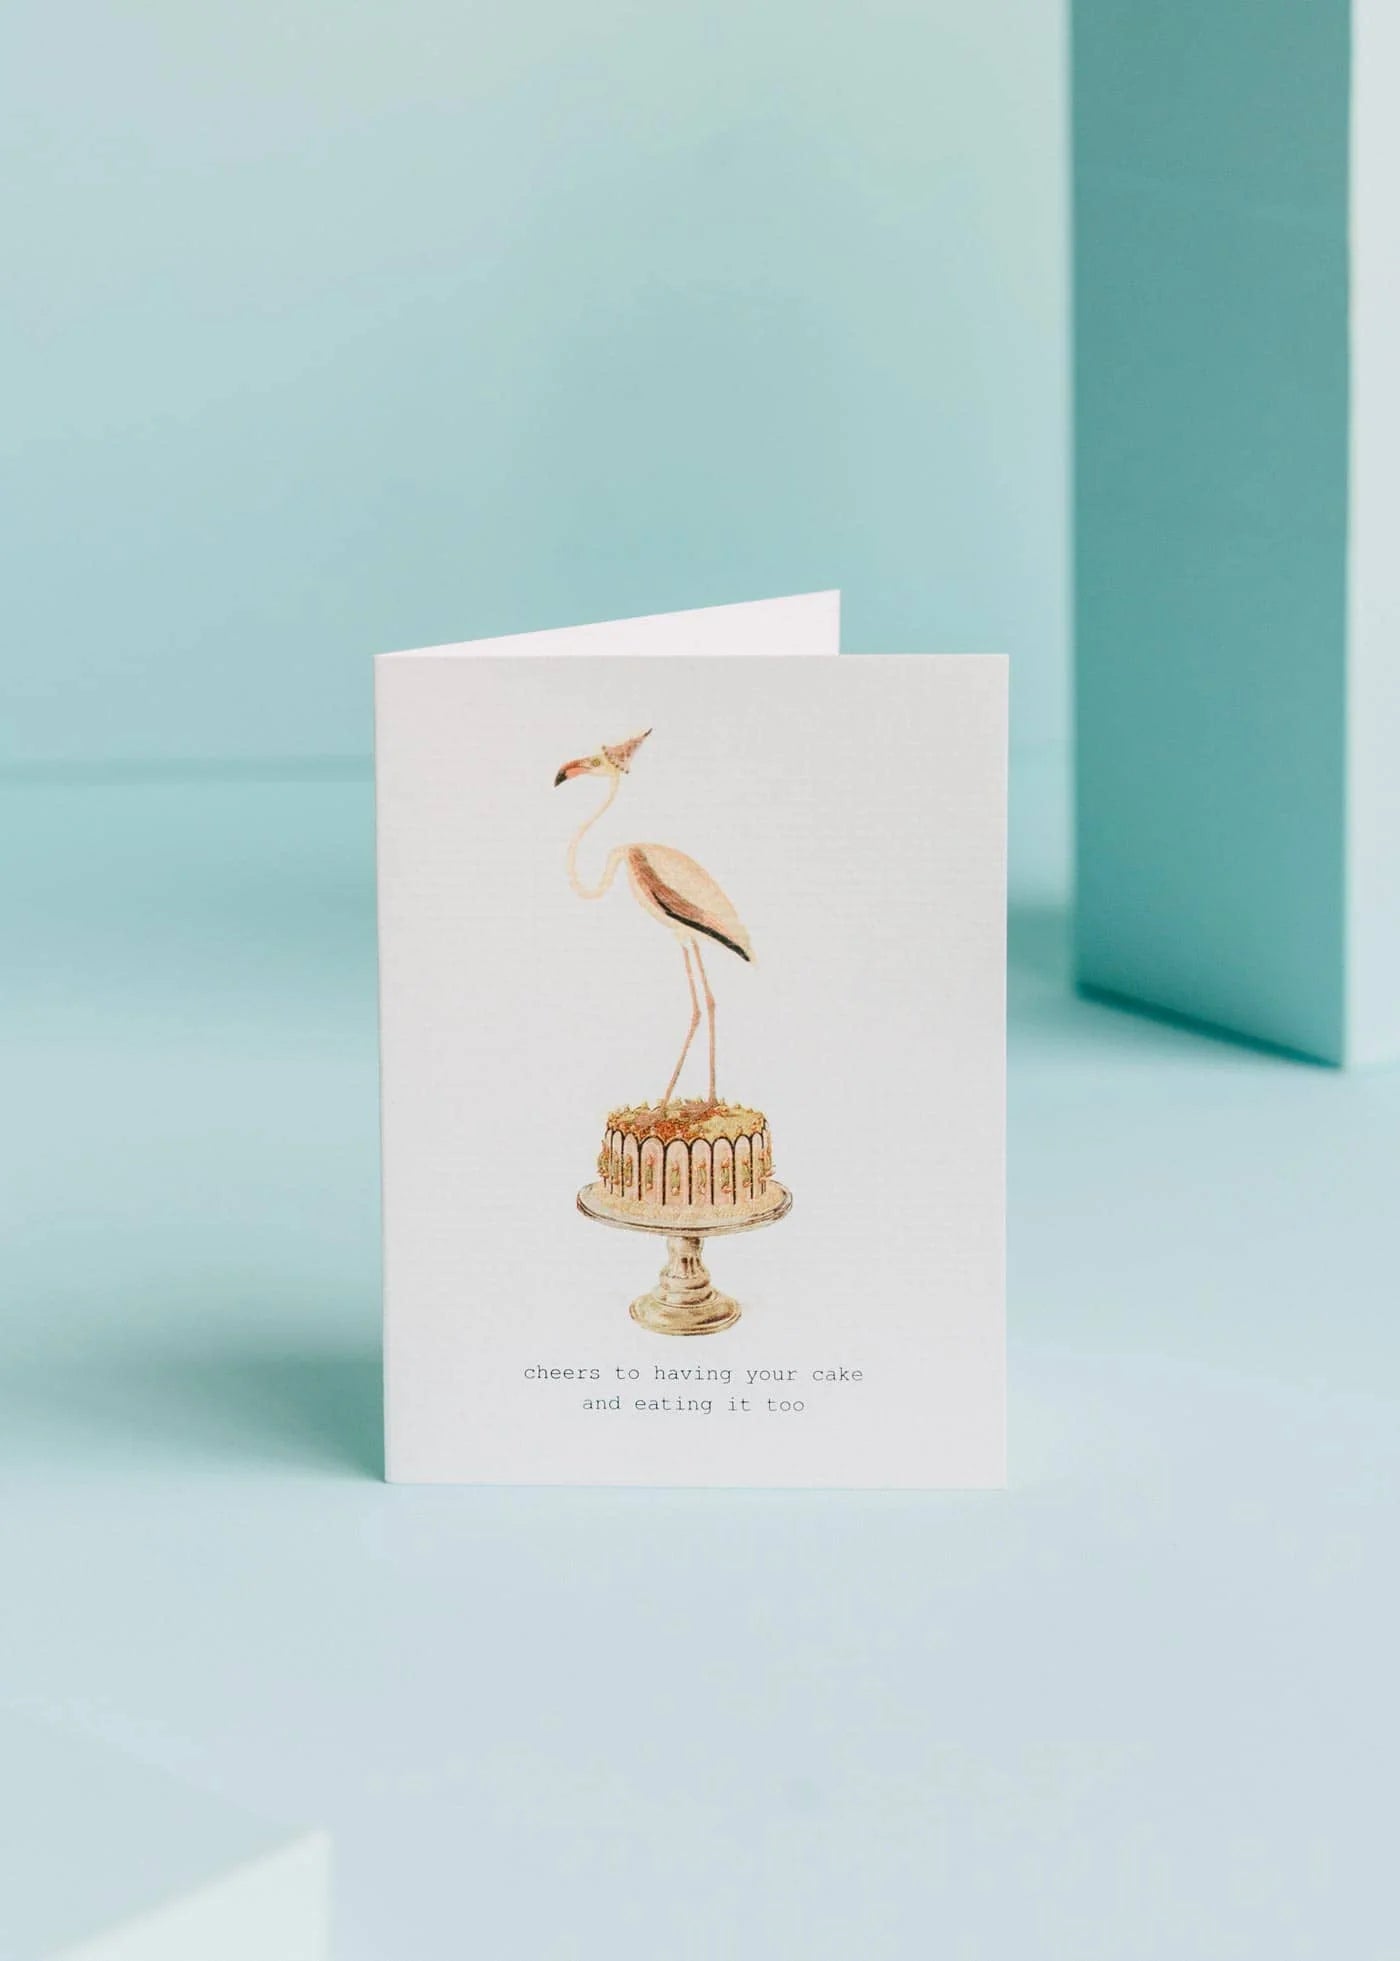 BIRTHDAY GREETING CARD "CHEERS TO HAVING YOUR CAKE"